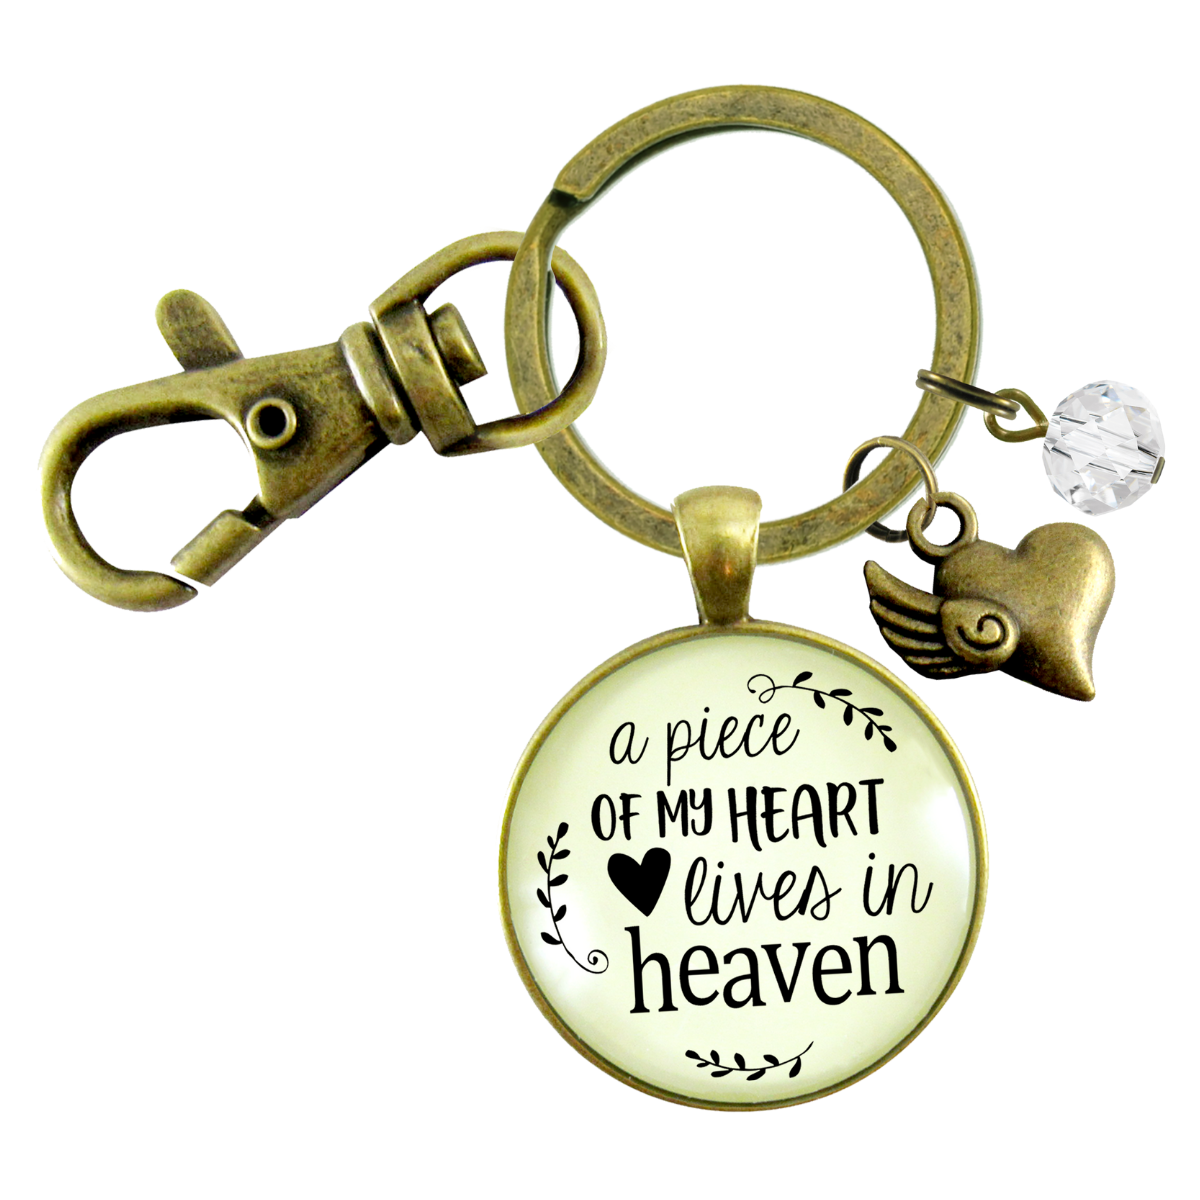 Memorial Keychain A Piece Of My Heart Lives In Heaven Remembrance Jewelry Heart - Gutsy Goodness Handmade Jewelry;Memorial Keychain A Piece Of My Heart Lives In Heaven Remembrance Jewelry Heart - Gutsy Goodness Handmade Jewelry Gifts